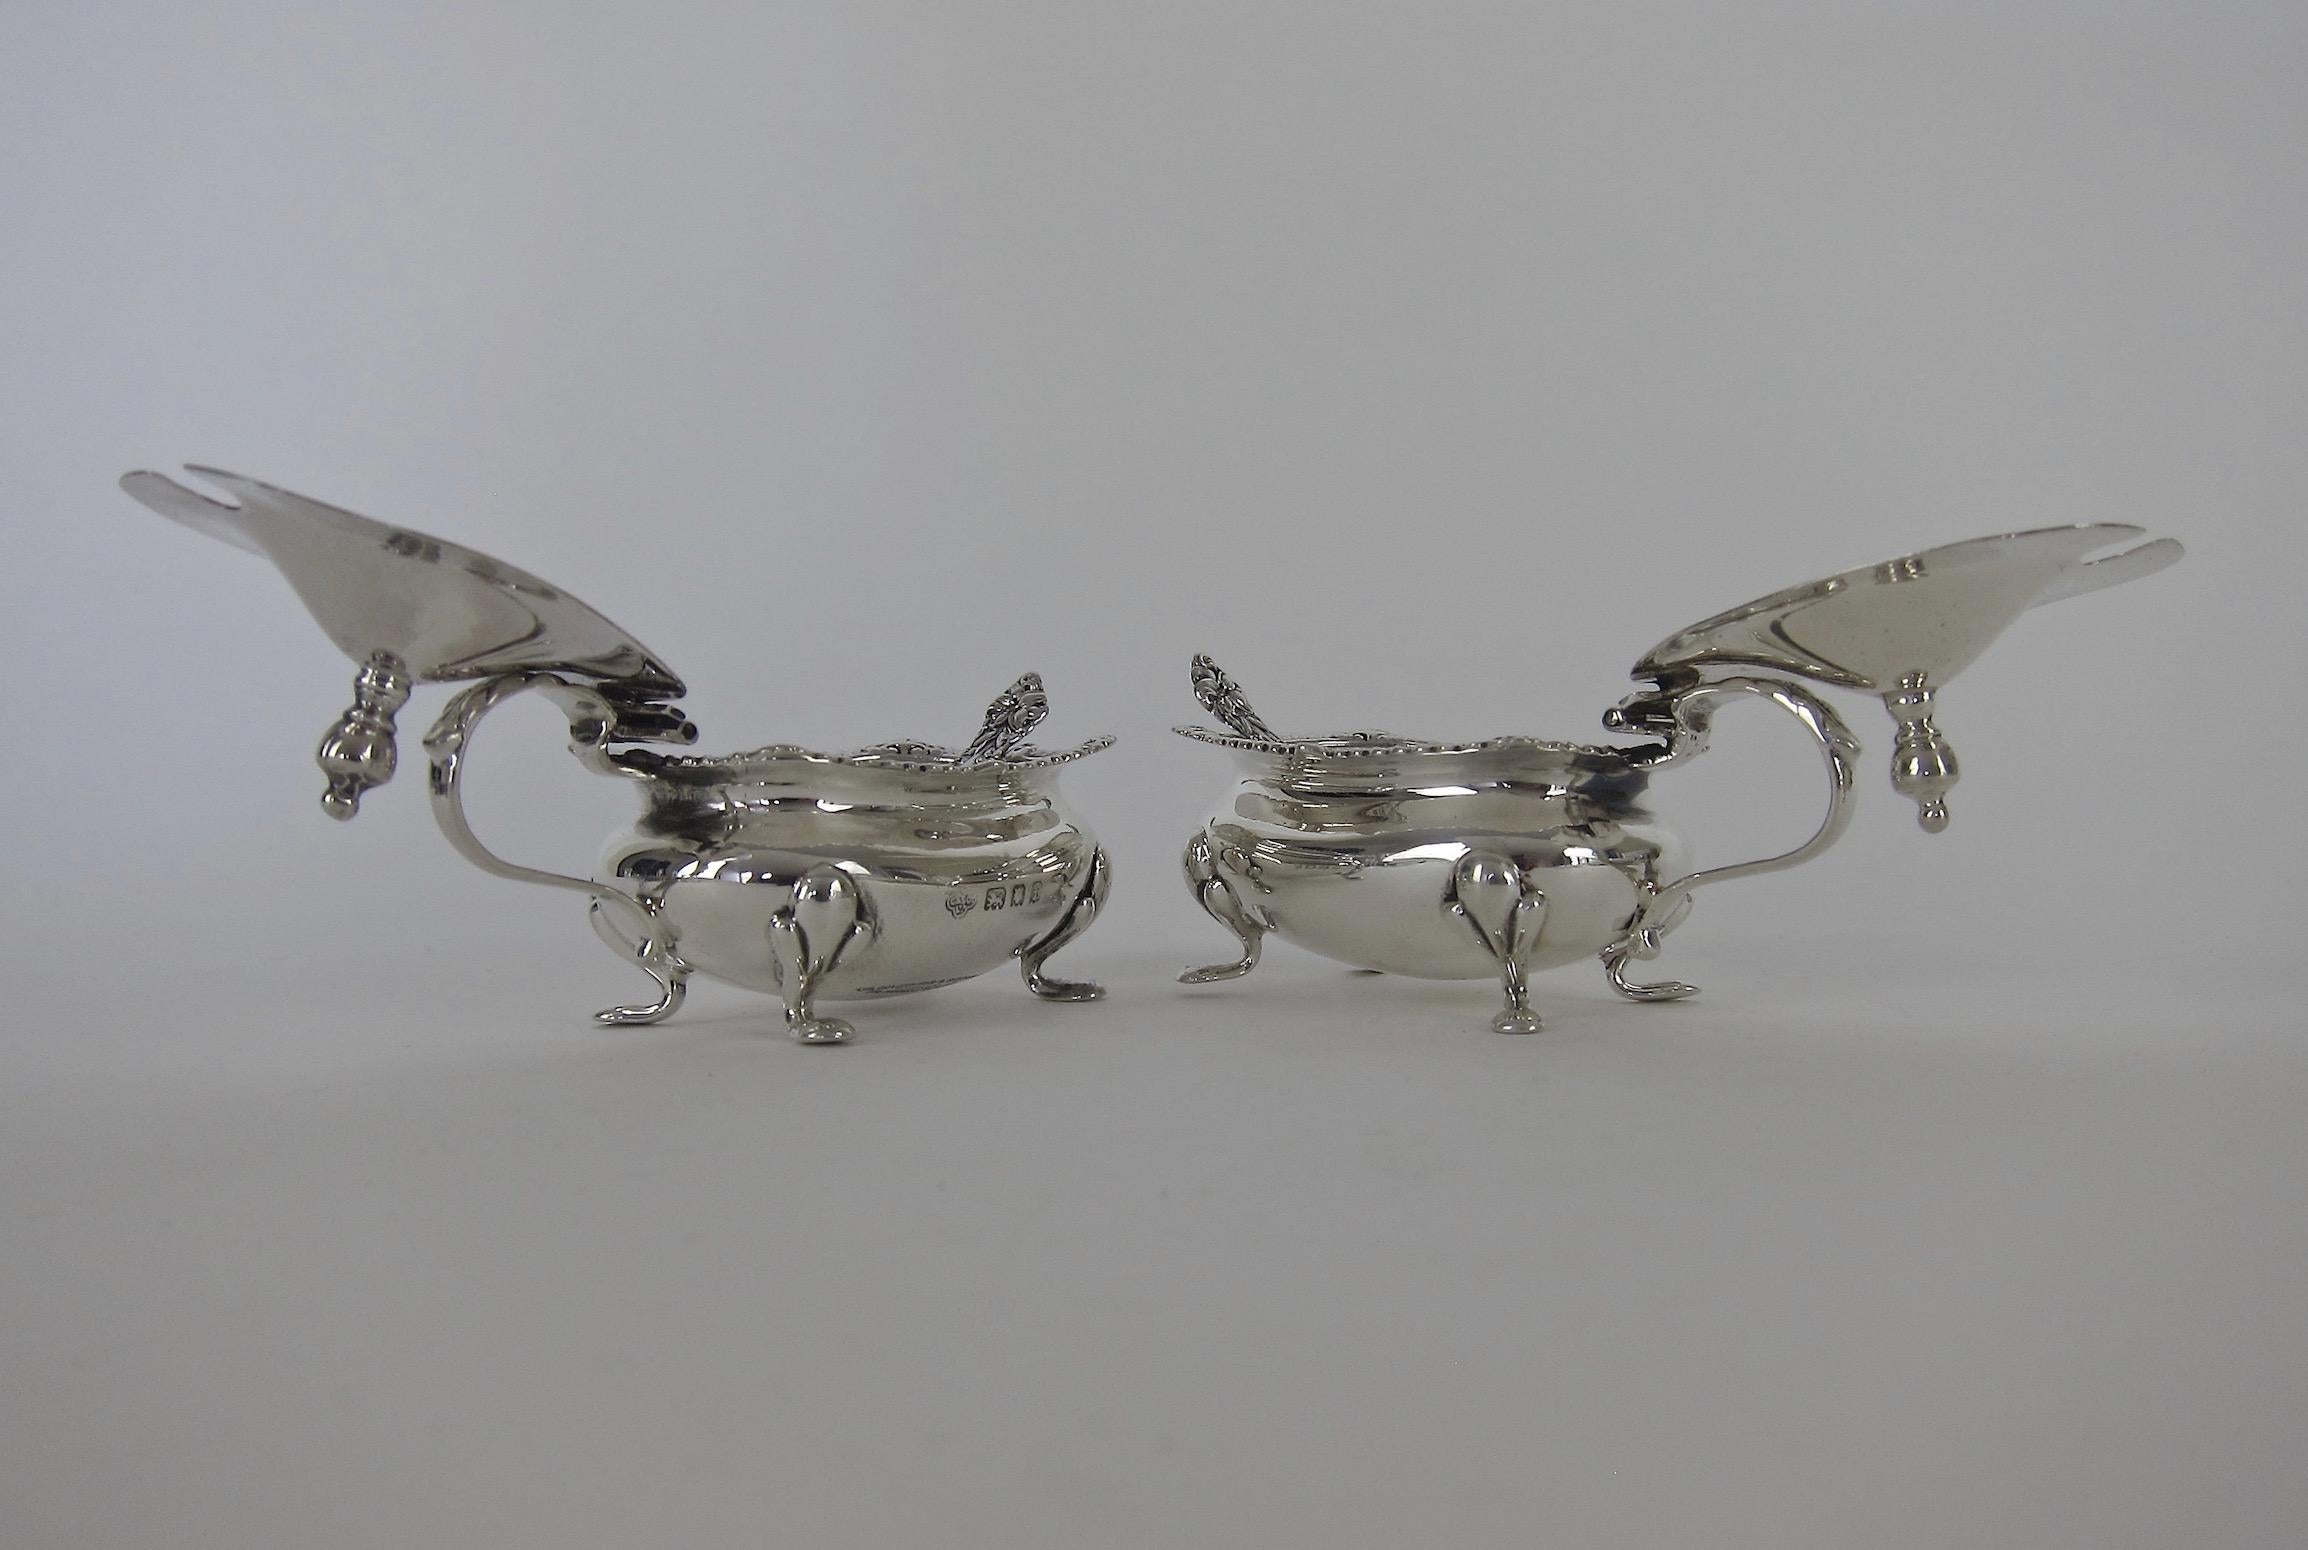 English Antique Sterling Silver Mustard Pots from the Goldsmiths & Silversmiths Co Ltd